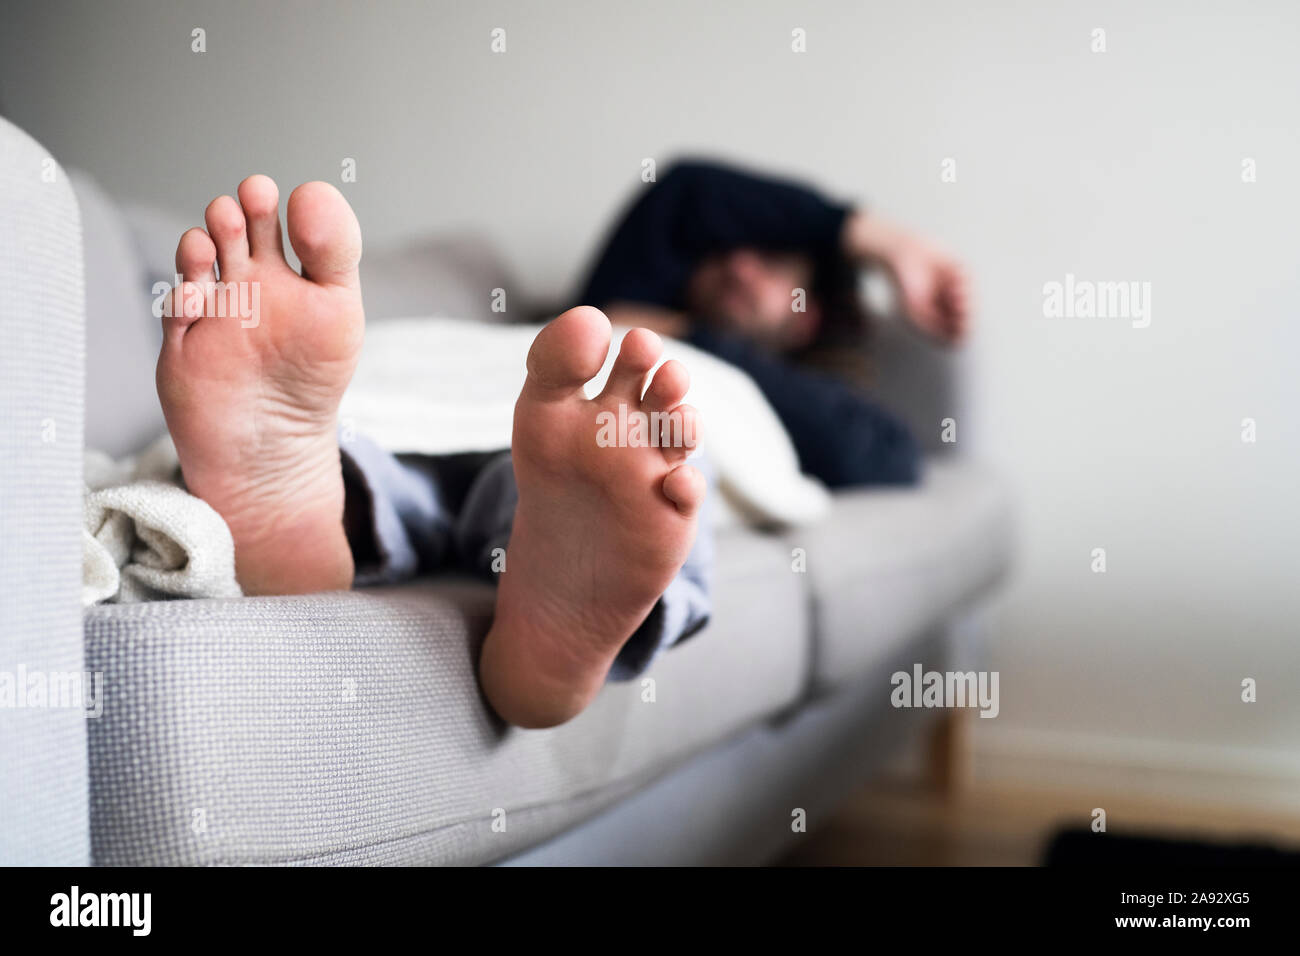 Man sleeping on sofa Banque D'Images